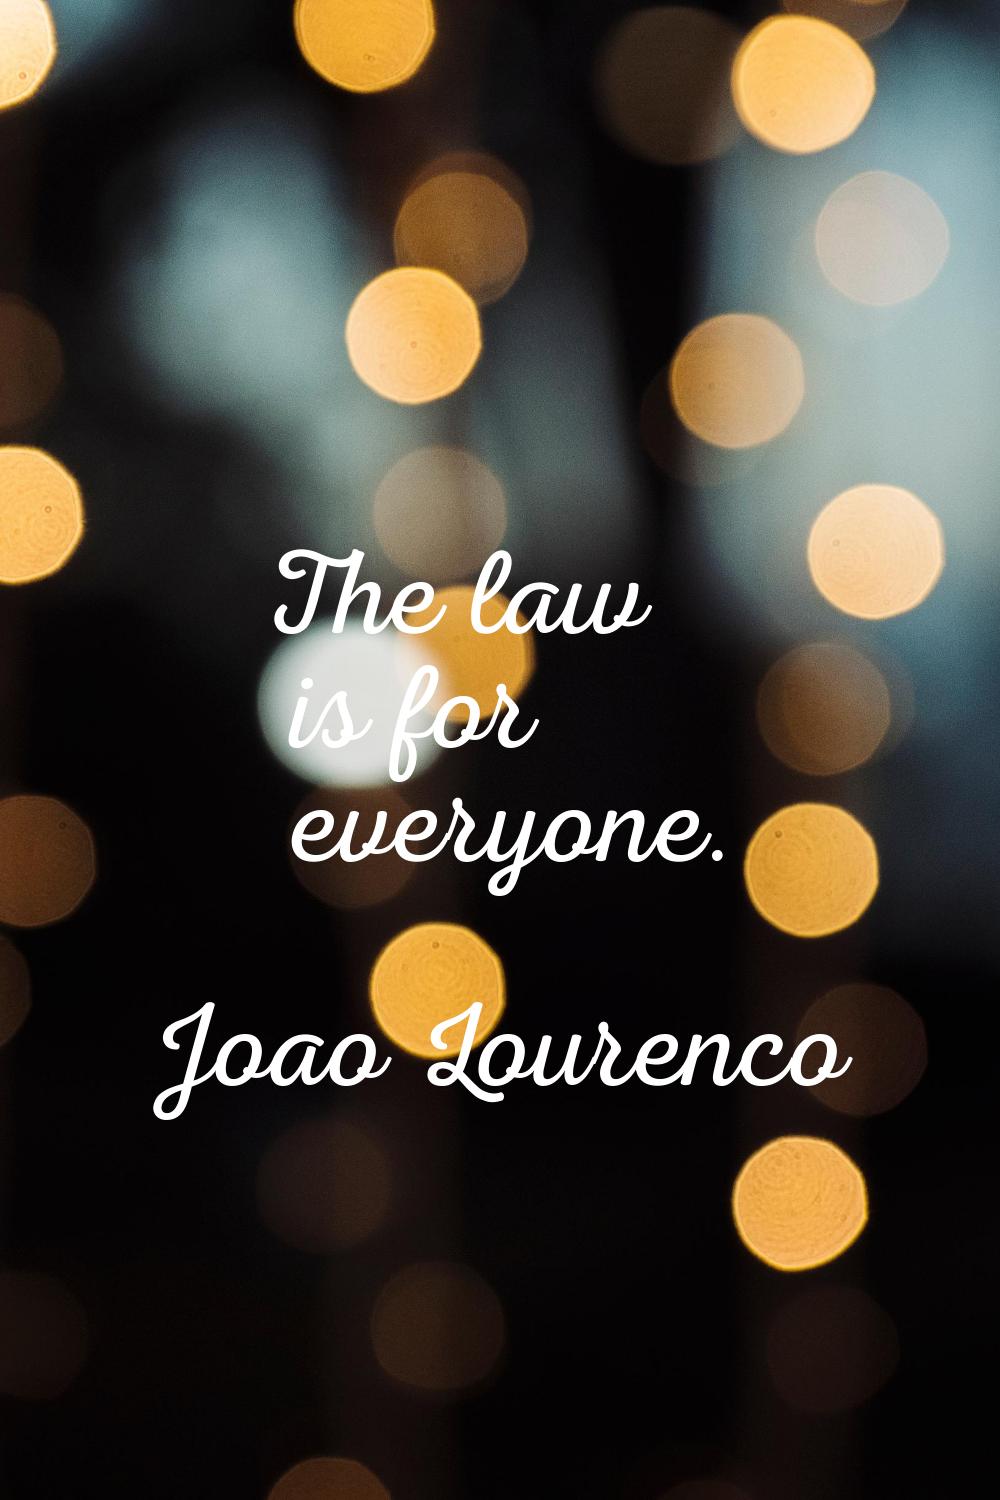 The law is for everyone.